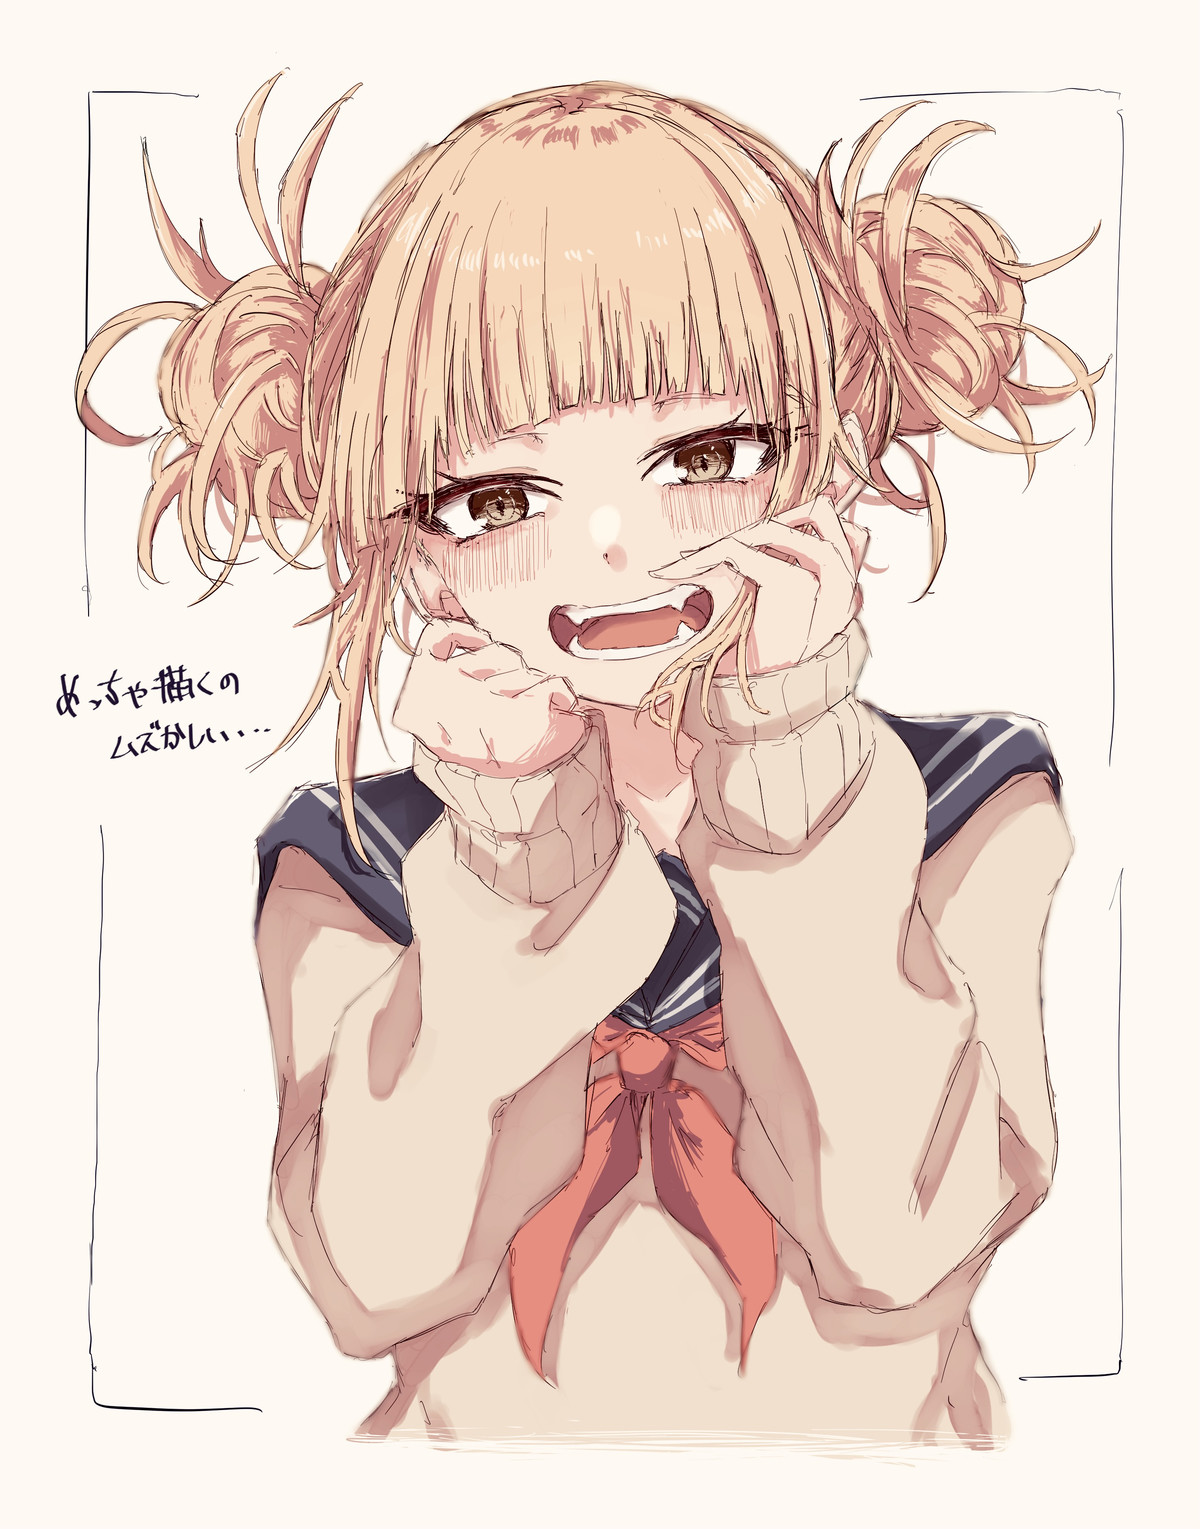 Daily Toga - 963: Happy Toga. join list: DailyToga (477 subs)Mention History Source: .. Cringe.